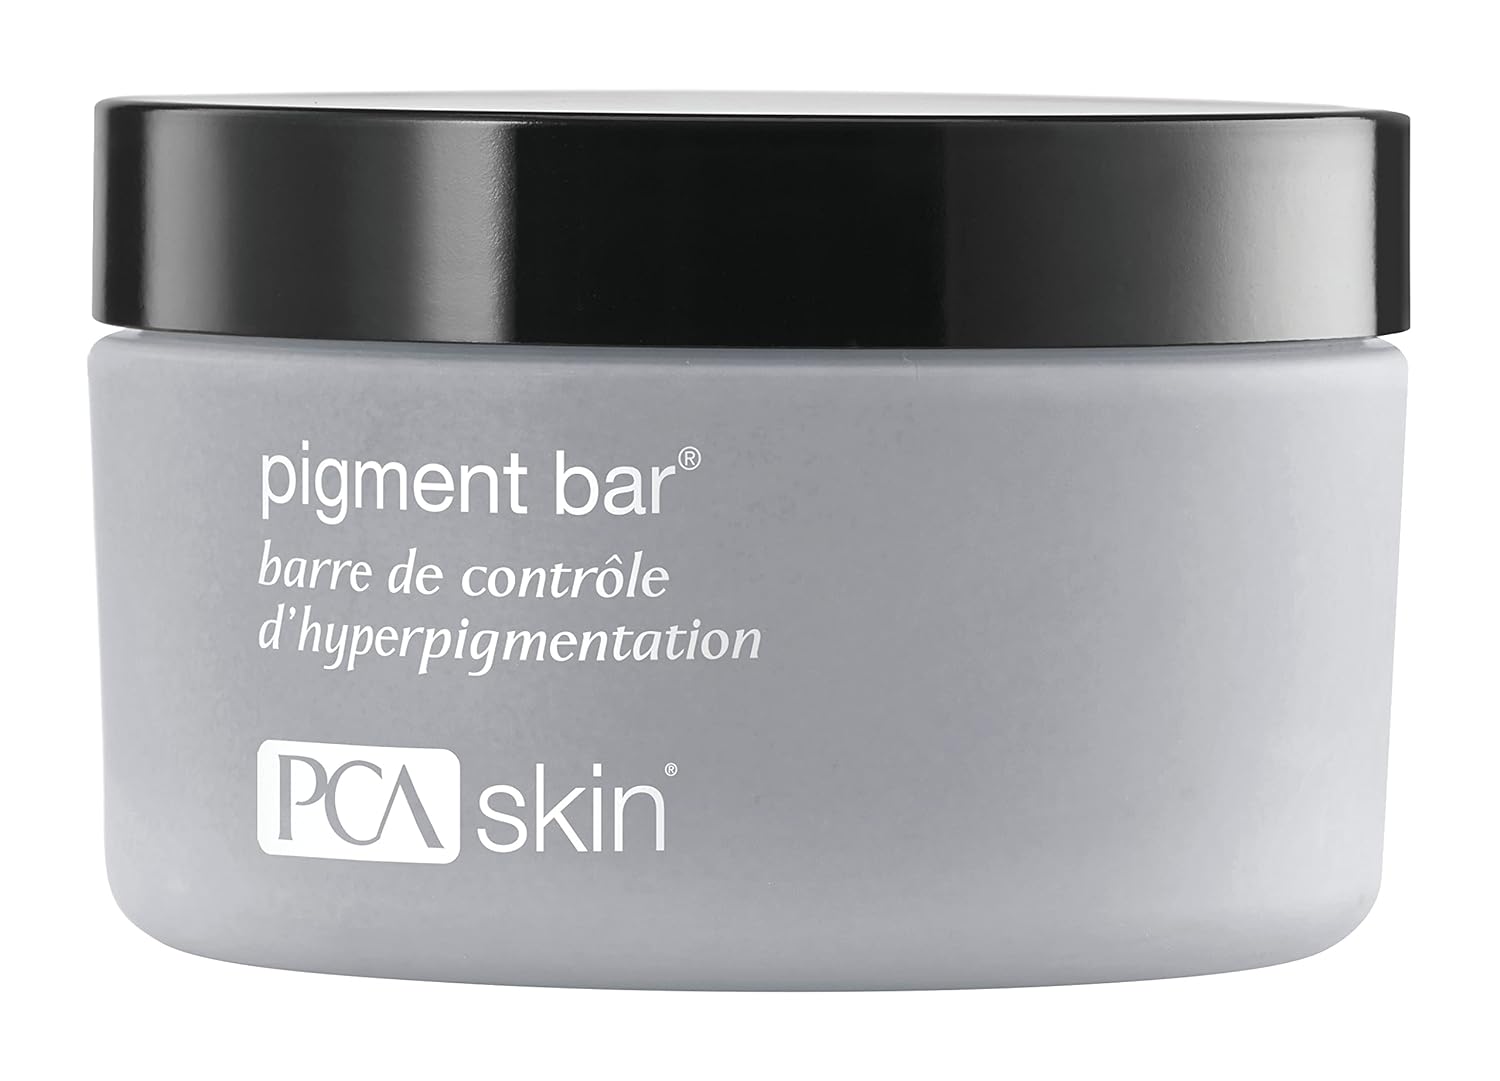 PCA SKIN Pigment Bar - Face & Body Cleansing Soap with Azelaic & Kojic Acids, Brightens Dark Spots, Discoloration & Uneven Skin Tone (3.2 )